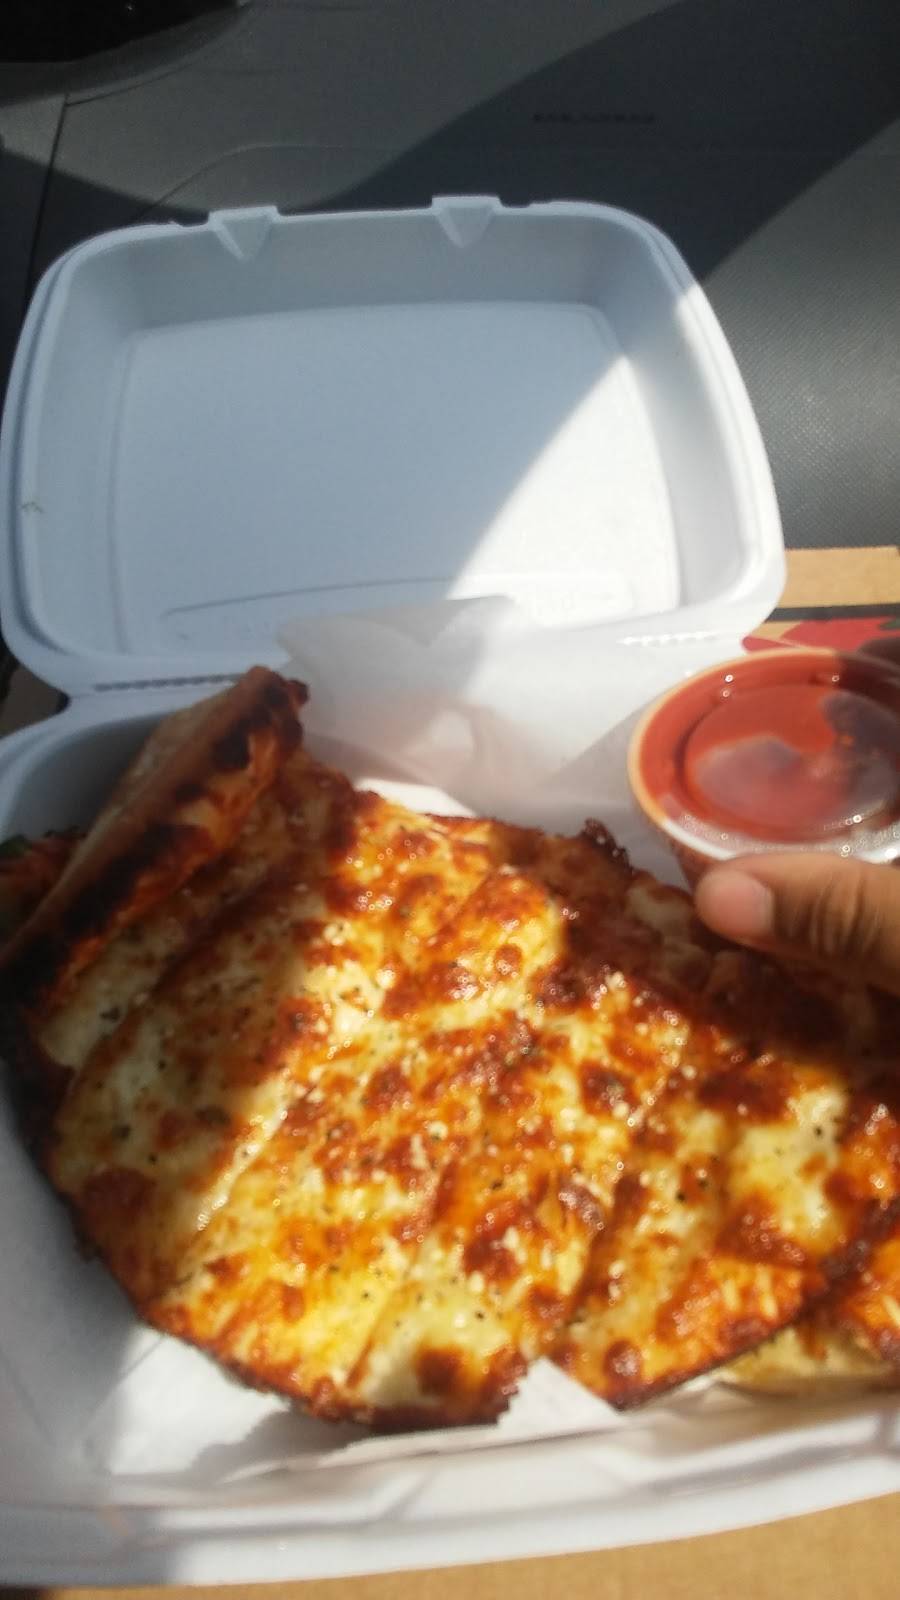 Georgios Oven Fresh Pizza | 3888 W 130th St, Cleveland, OH 44111 | Phone: (216) 671-3800